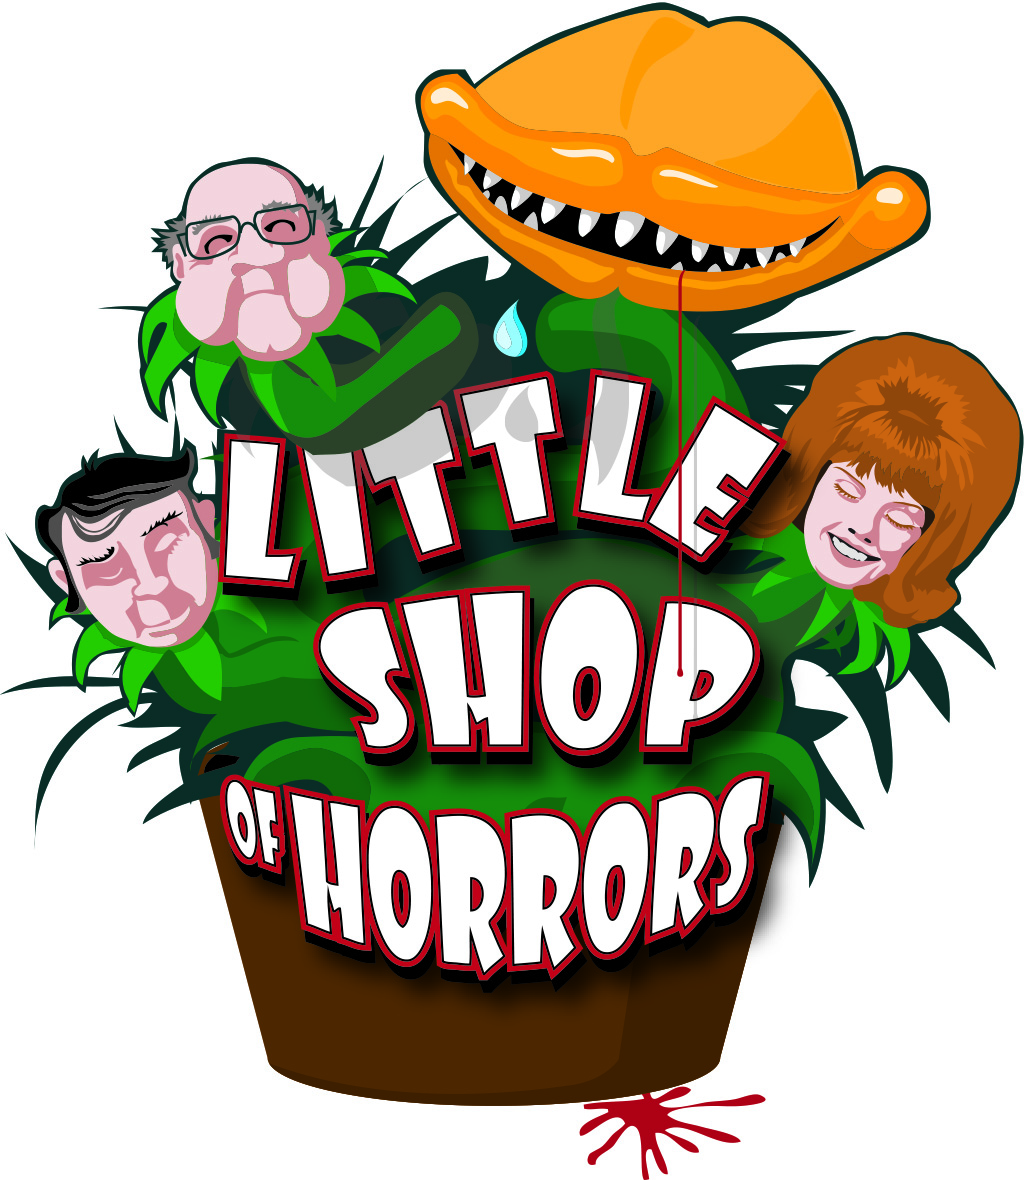 Open auditions for Little Shop of Horrors